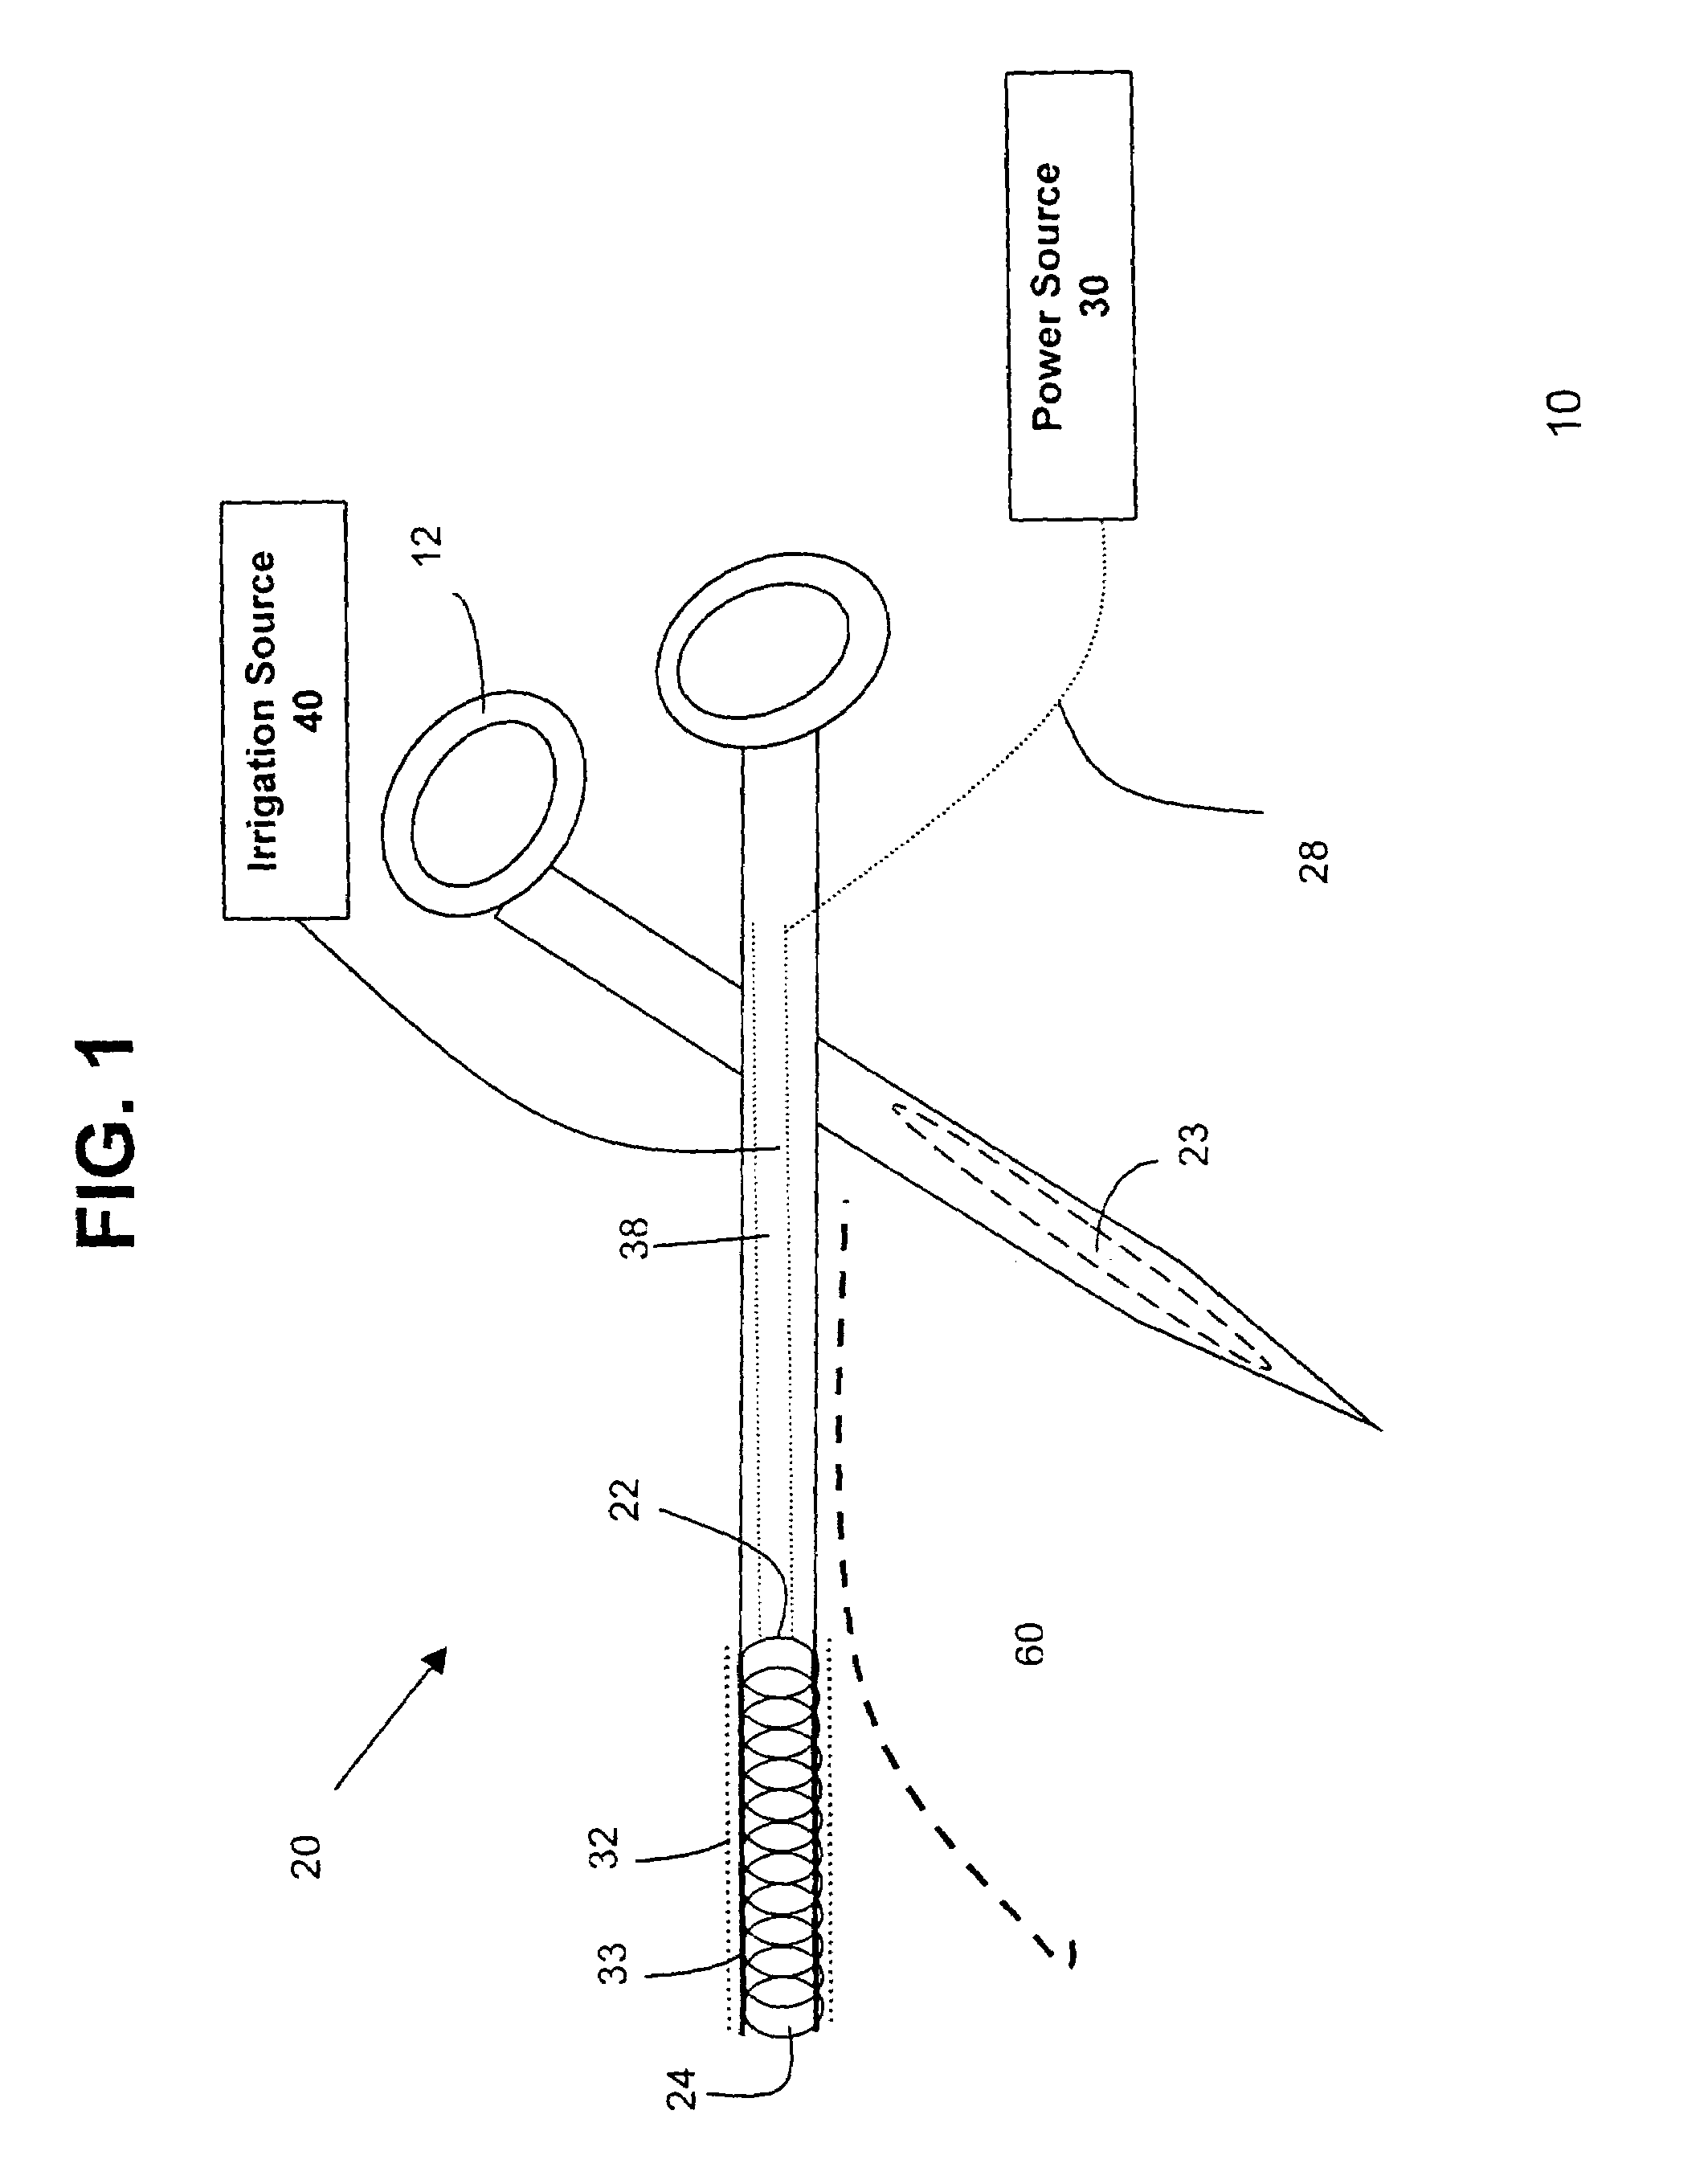 Method and apparatus for tissue ablation